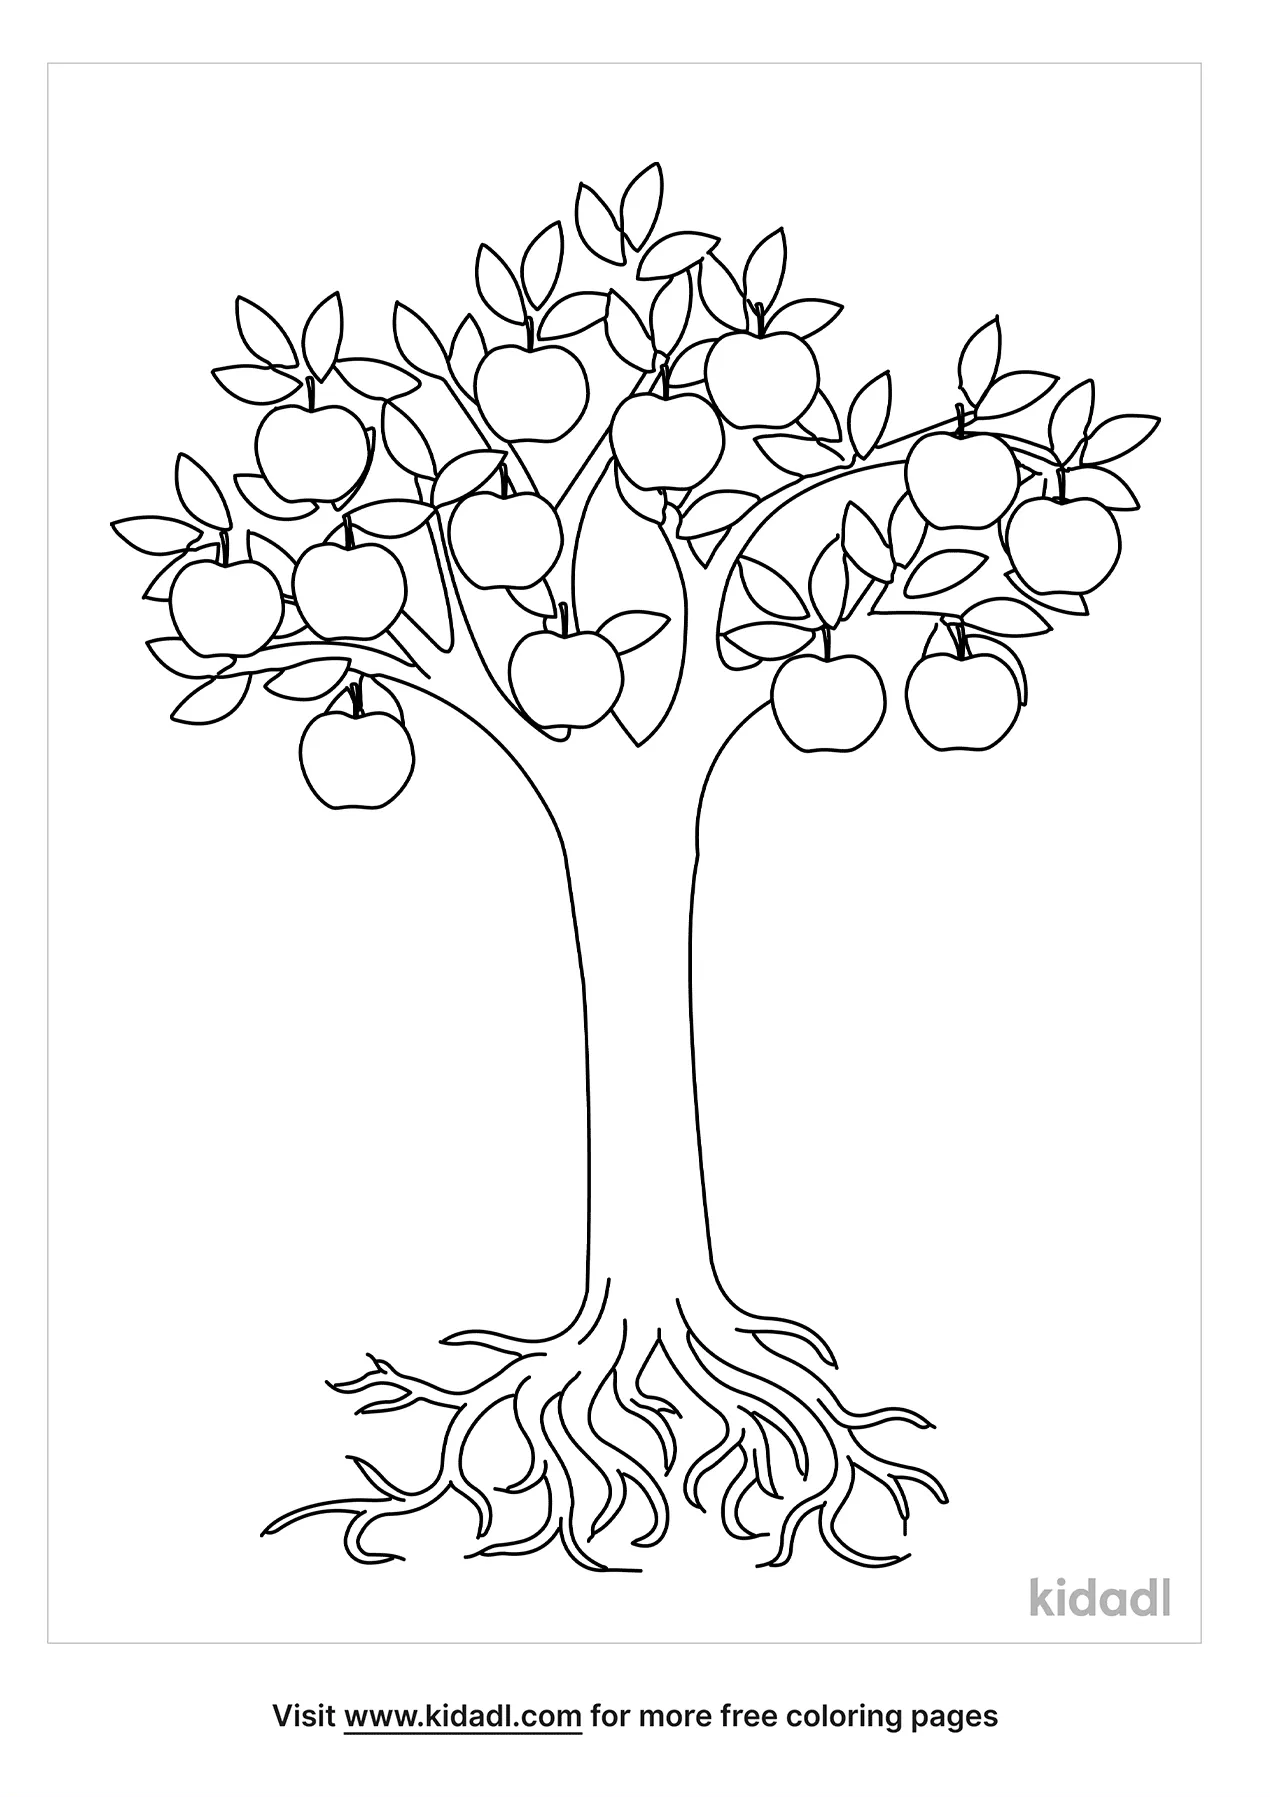 Apple Tree With Roots Coloring Page